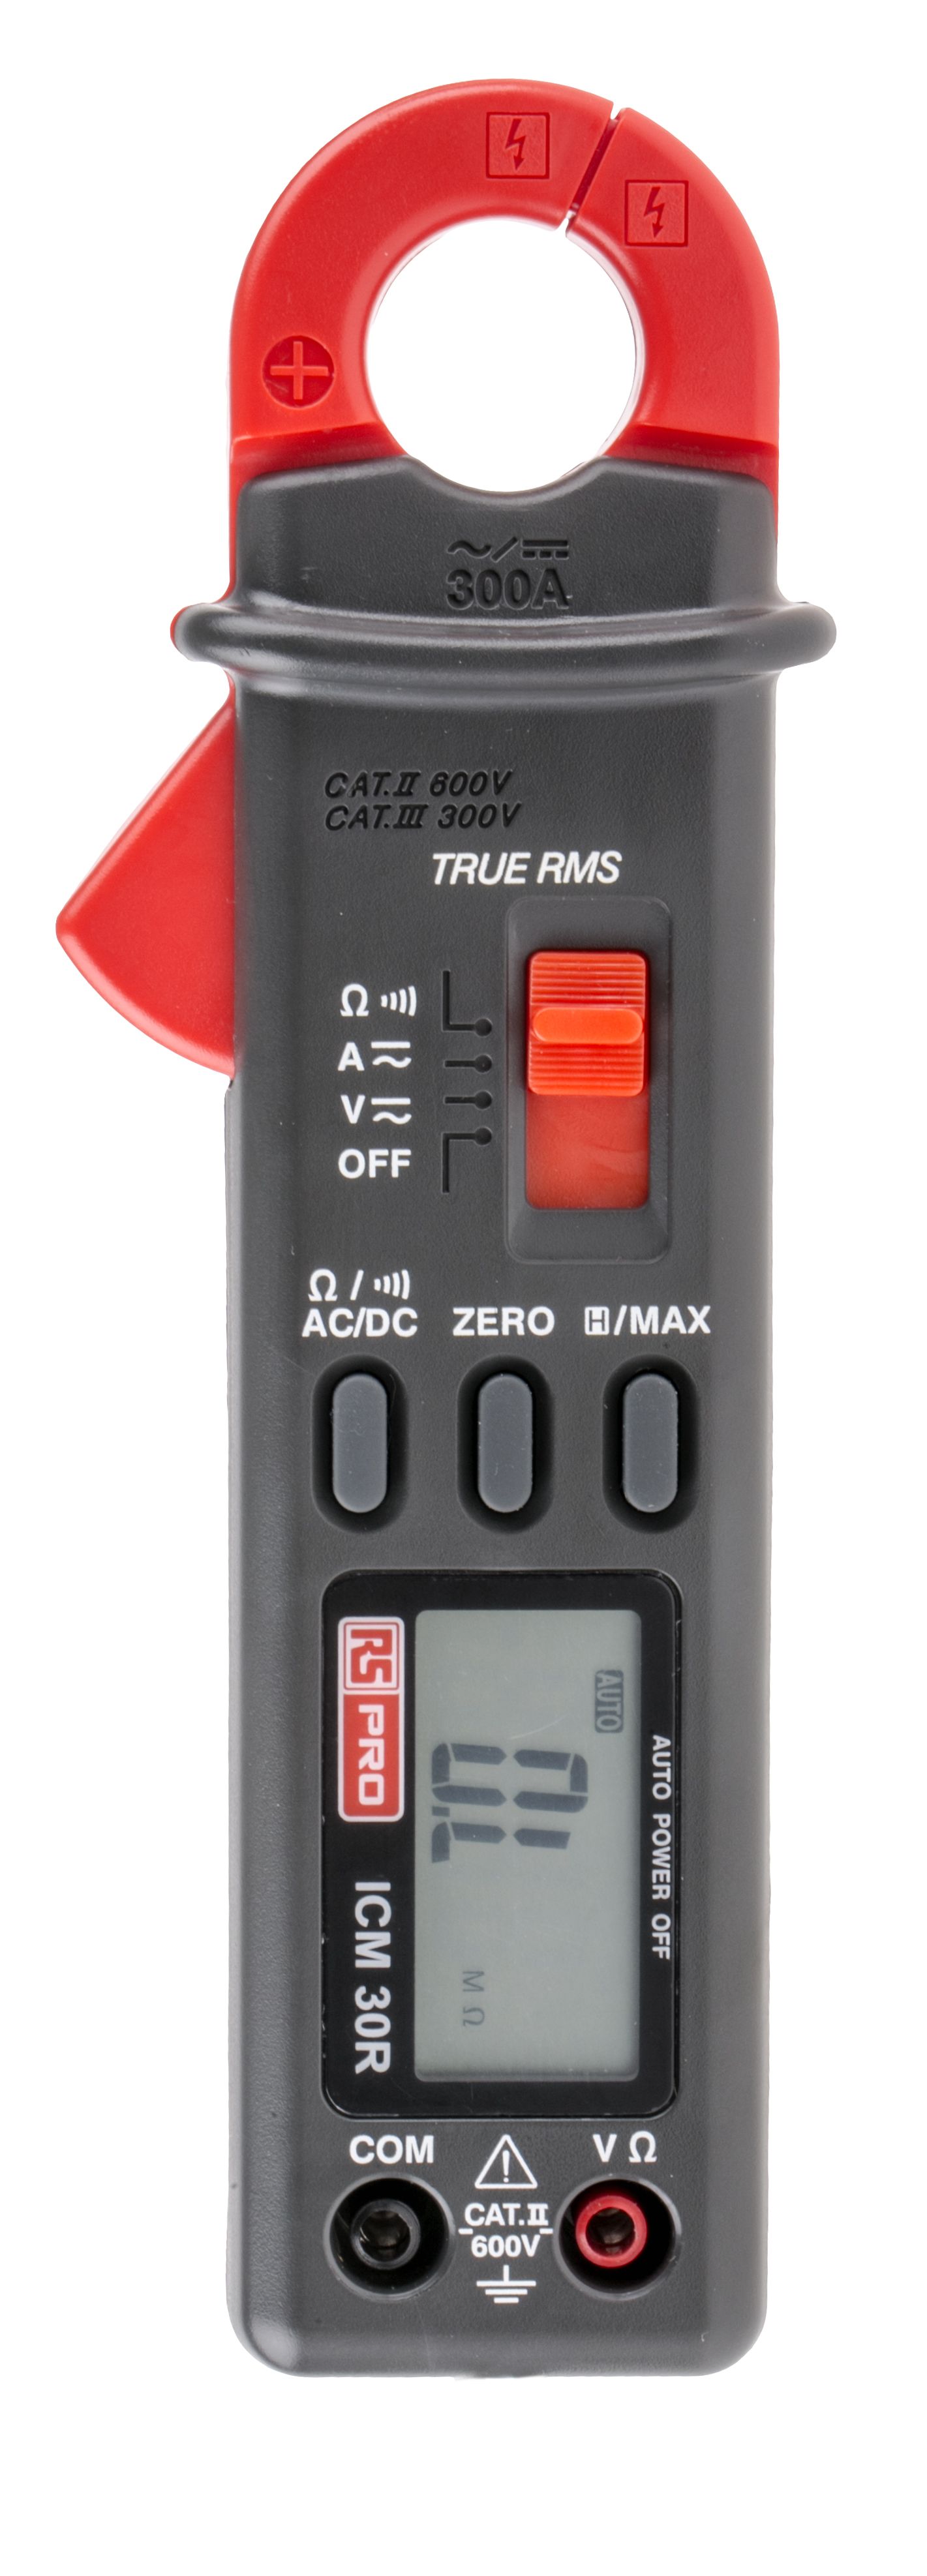 RS PRO ICM30R AC/DC Clamp Meter, 300A dc, Max Current 300A ac CAT III 300V With RS Calibration